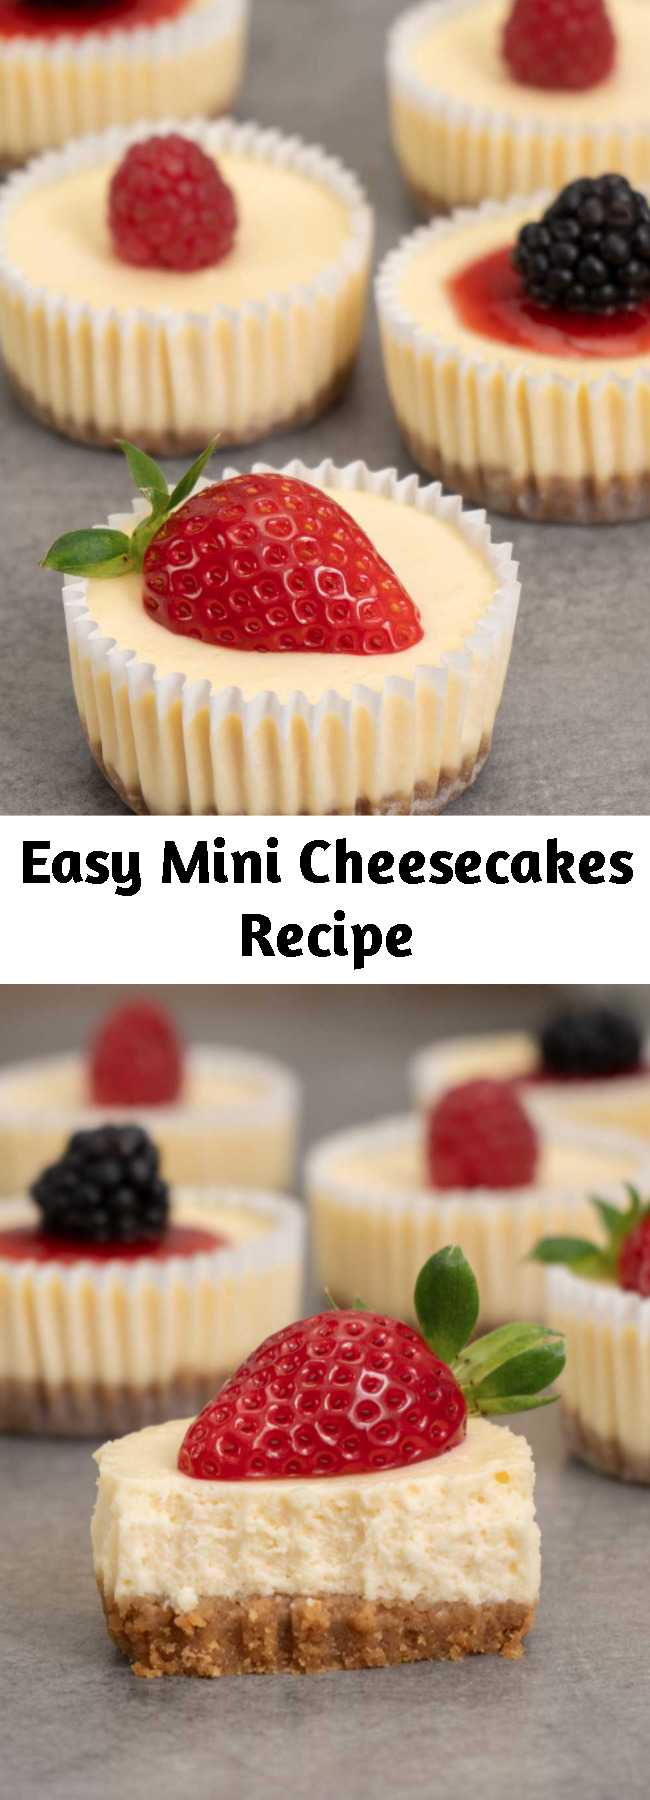 Easy Mini Cheesecakes Recipe - Inspired by Cheesecake Factory, these mini cheesecakes have super creamy texture and taste. They are easy to make and great to take to parties and gatherings. Enjoy them as they are or with your favourite marmalade and berries. Yum!